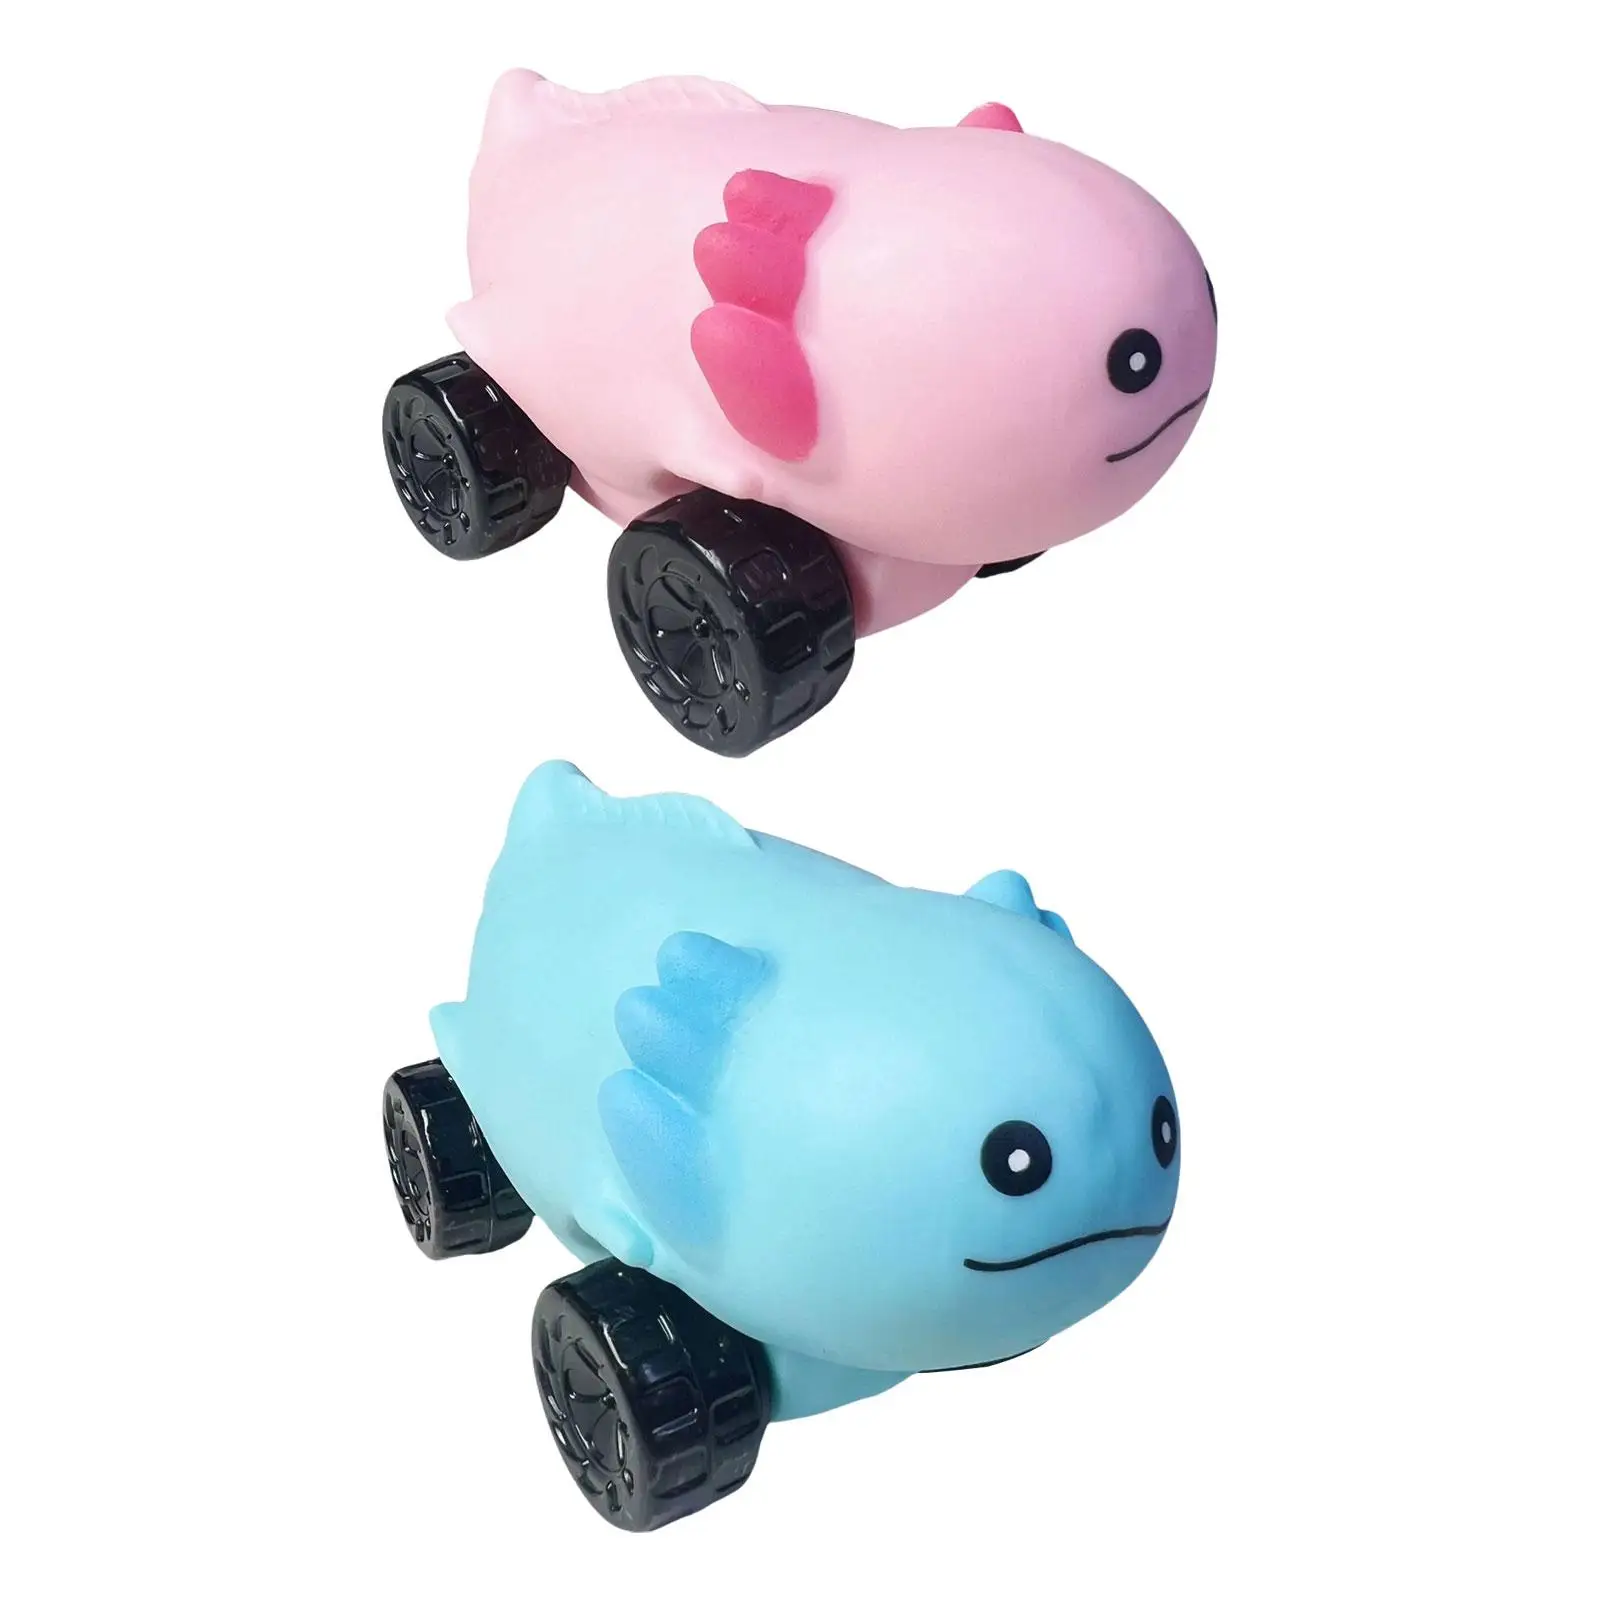 

Fidget Car Toy Stocking Stuffer Fillers Ornament Expandable Calming Funny Cute Travel Toy for All Ages Gift Teens Kids Children